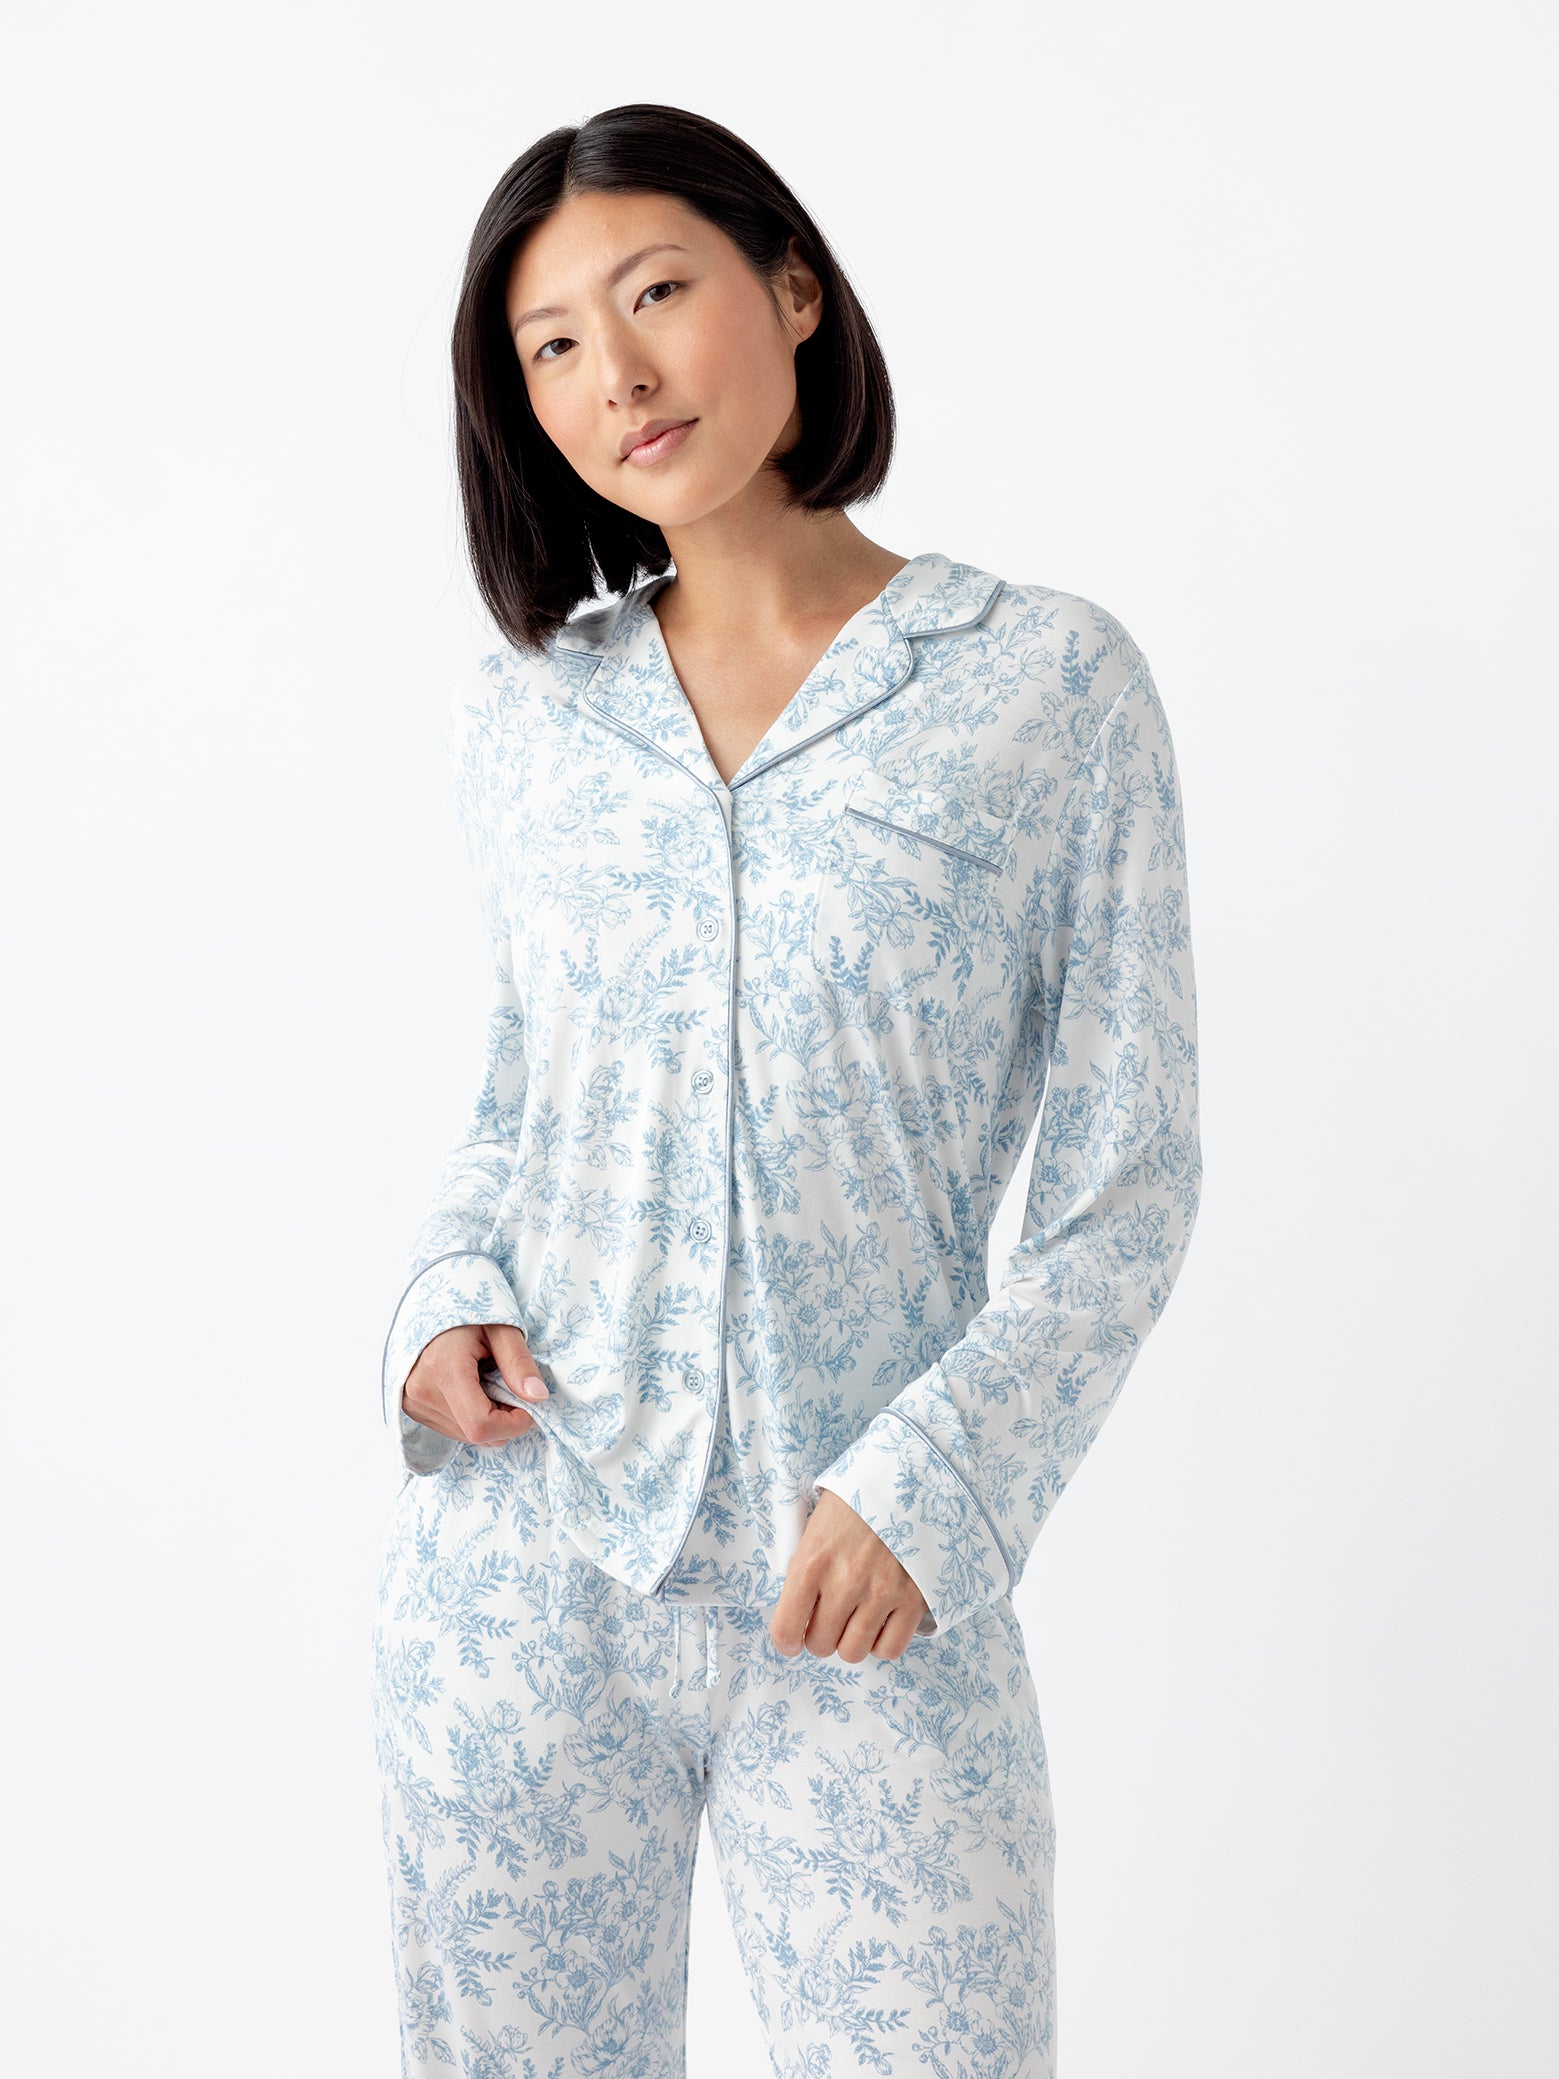 Woman wearing blue toile pajama shirt with white background 